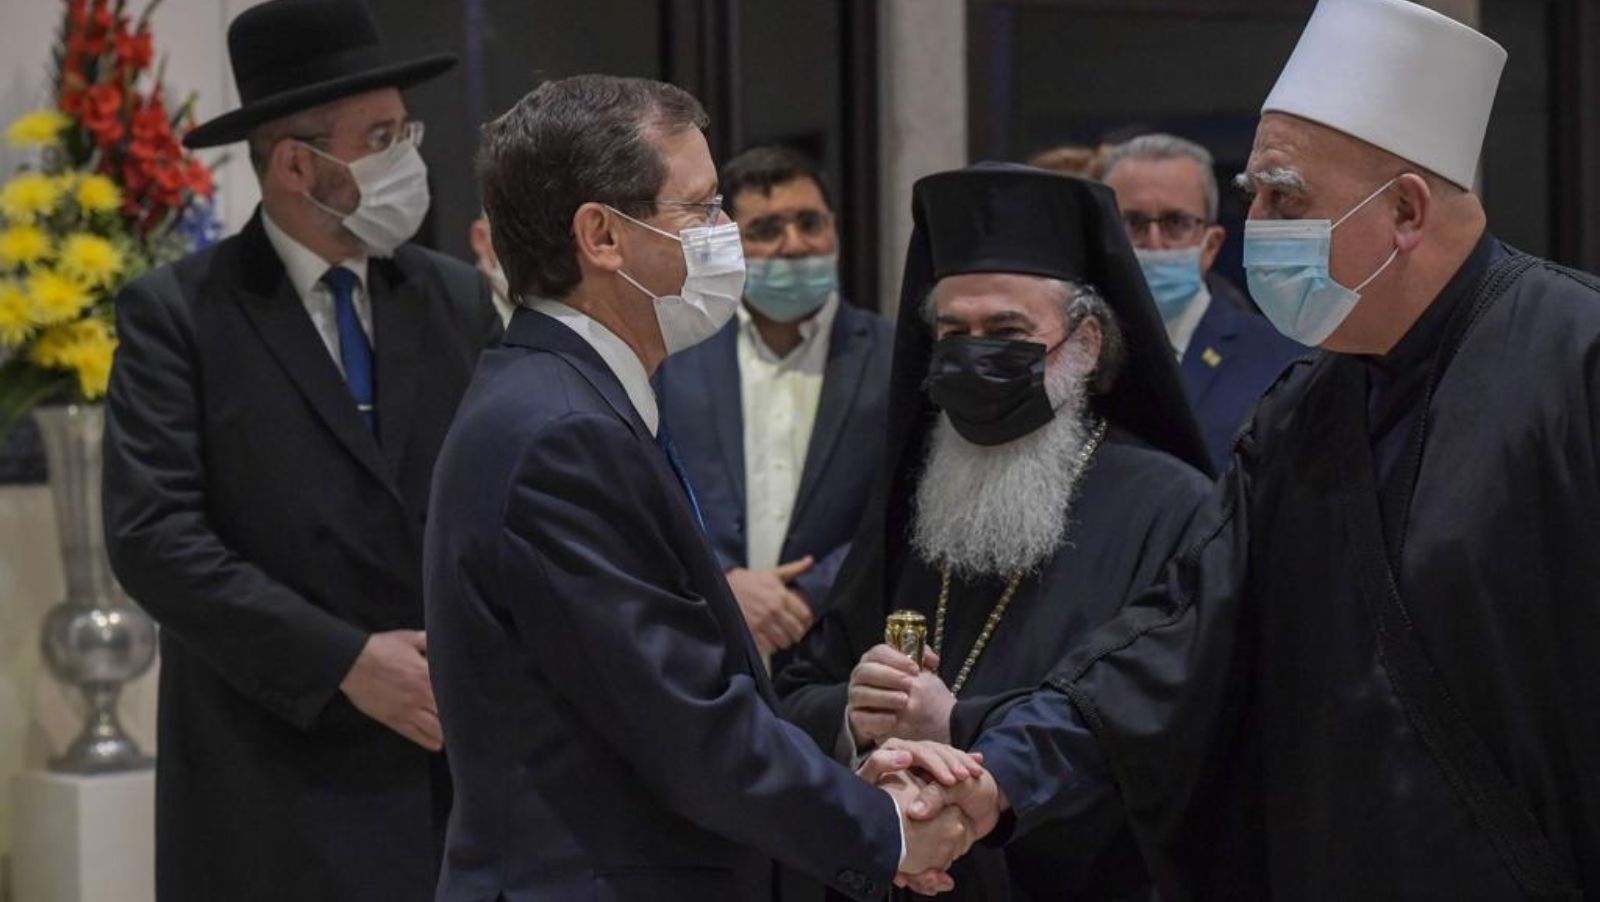 President Isaac Herzog, left, greets Israel’s religious leaders during an interfaith call for Covid vaccination at his residence in Jerusalem. Koby Gideon/GPO